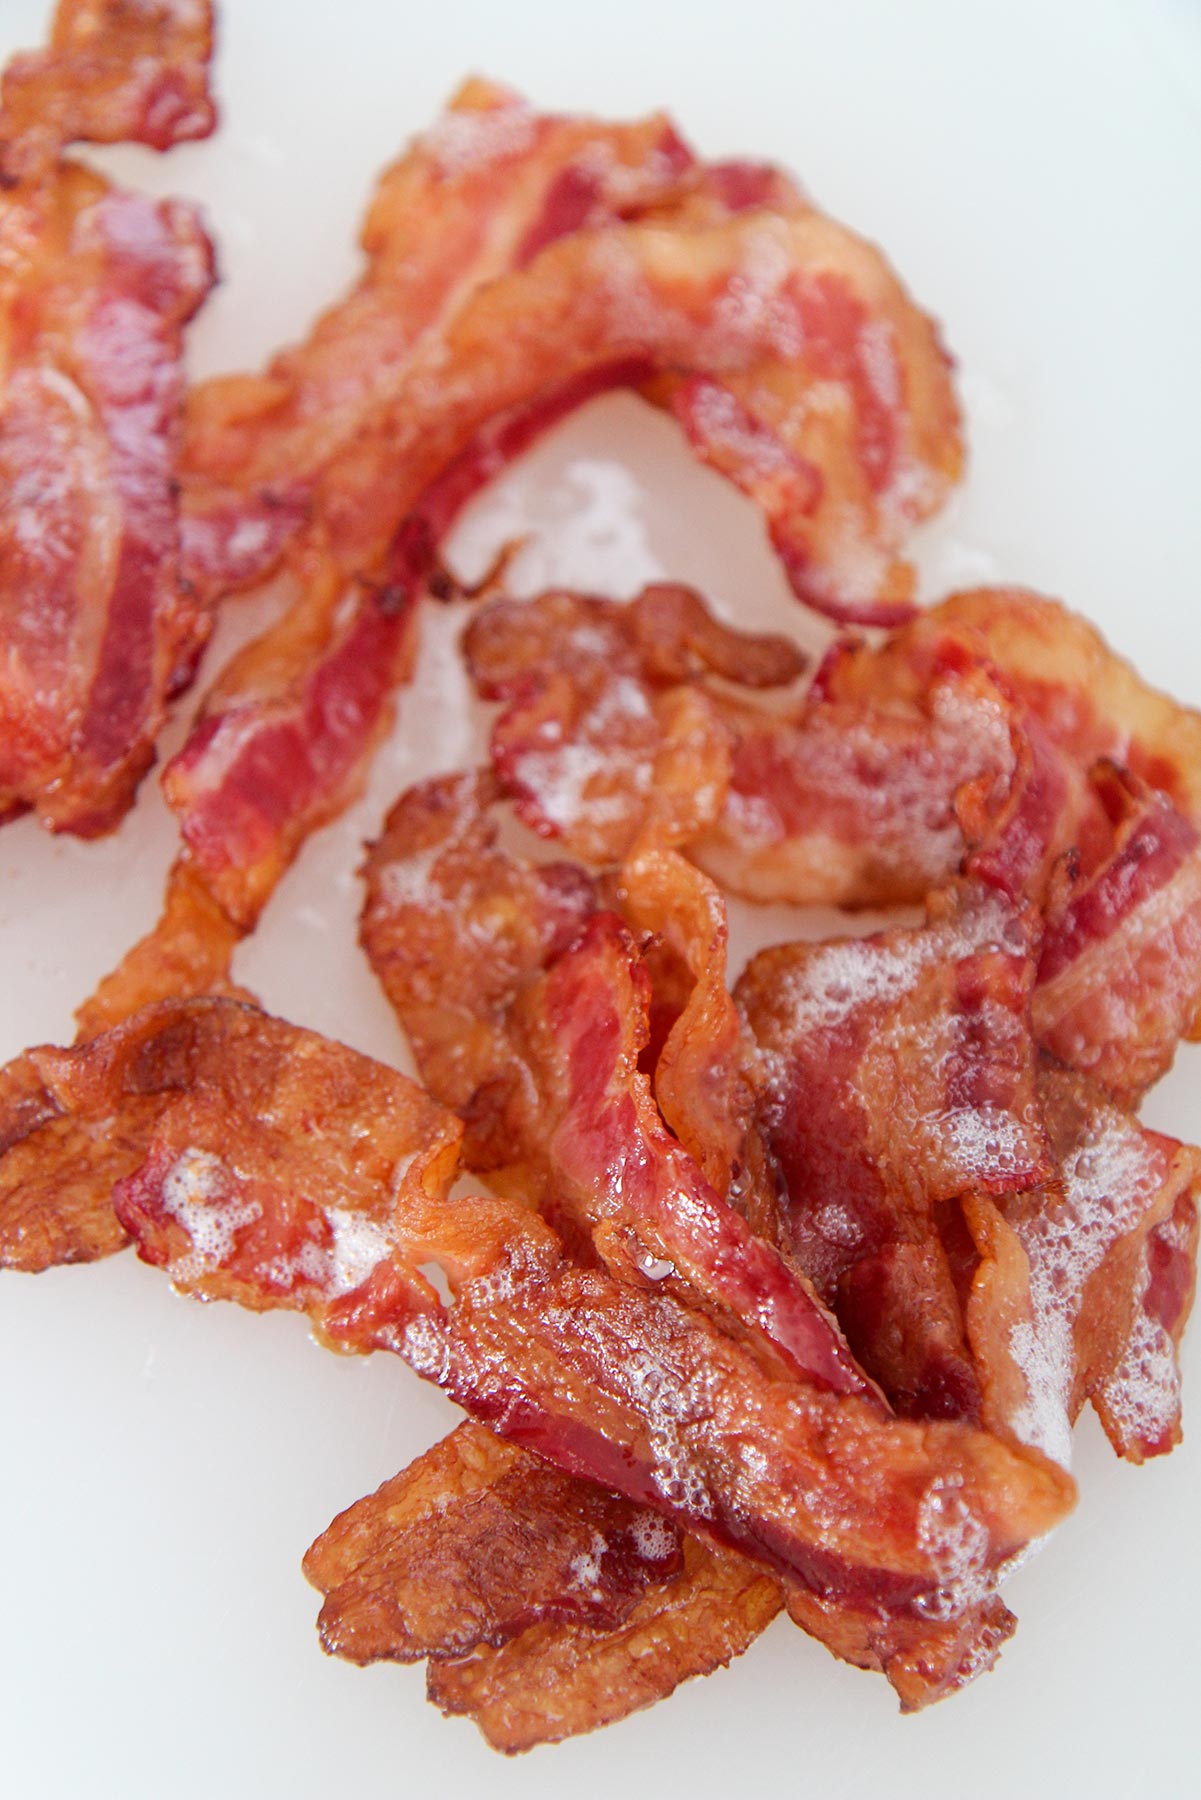 Oven Baked Bacon - perfectly cripsy